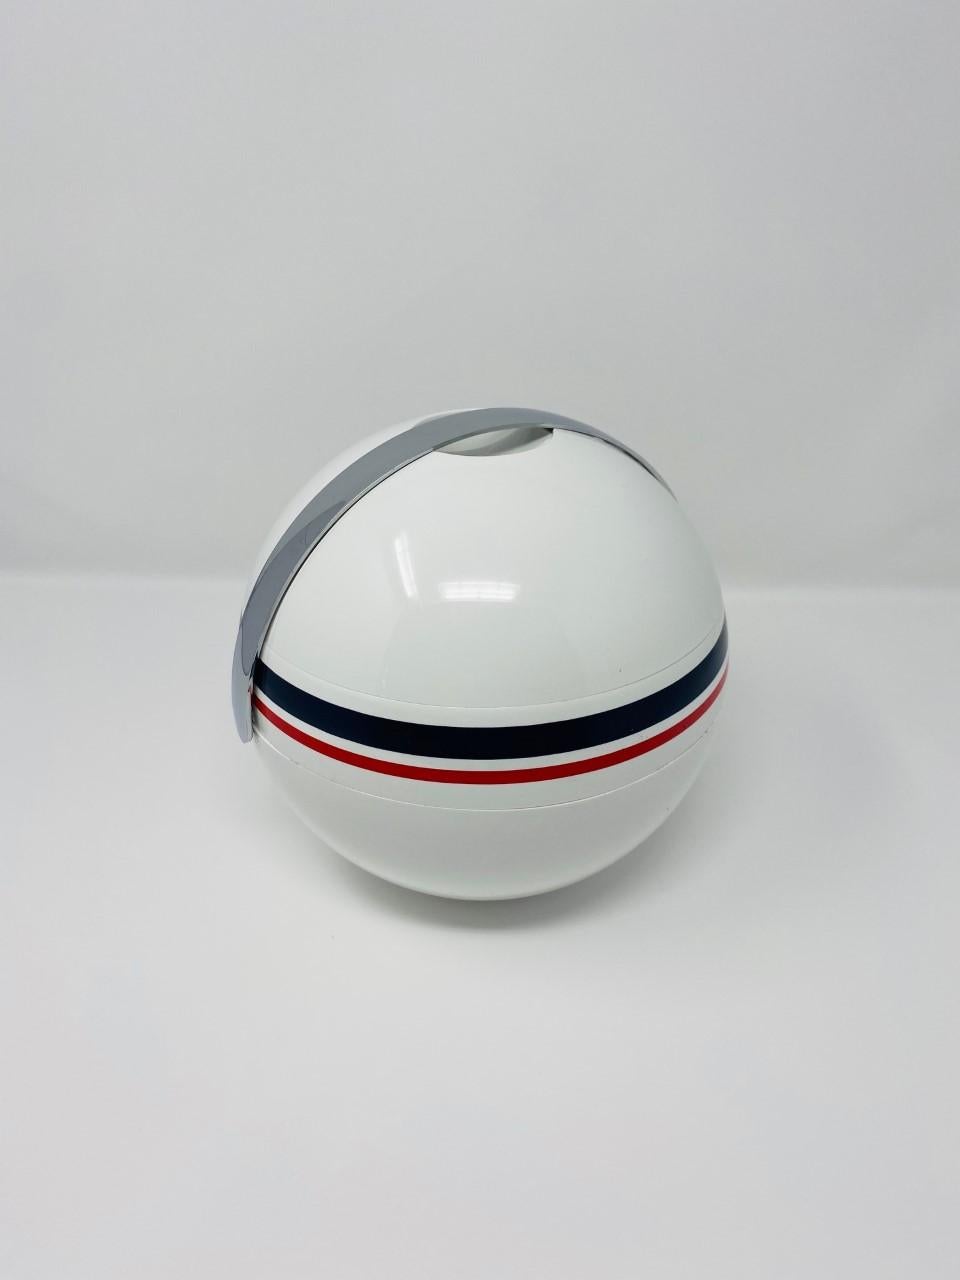 Striking and high design piece created by Paolo Tilche for Guzzini. It’s Space Age design consists of an ecru sphere with navy blue and red stripes with a silver chrome handle that accentuates the special design. The ice bucket is complemented by a